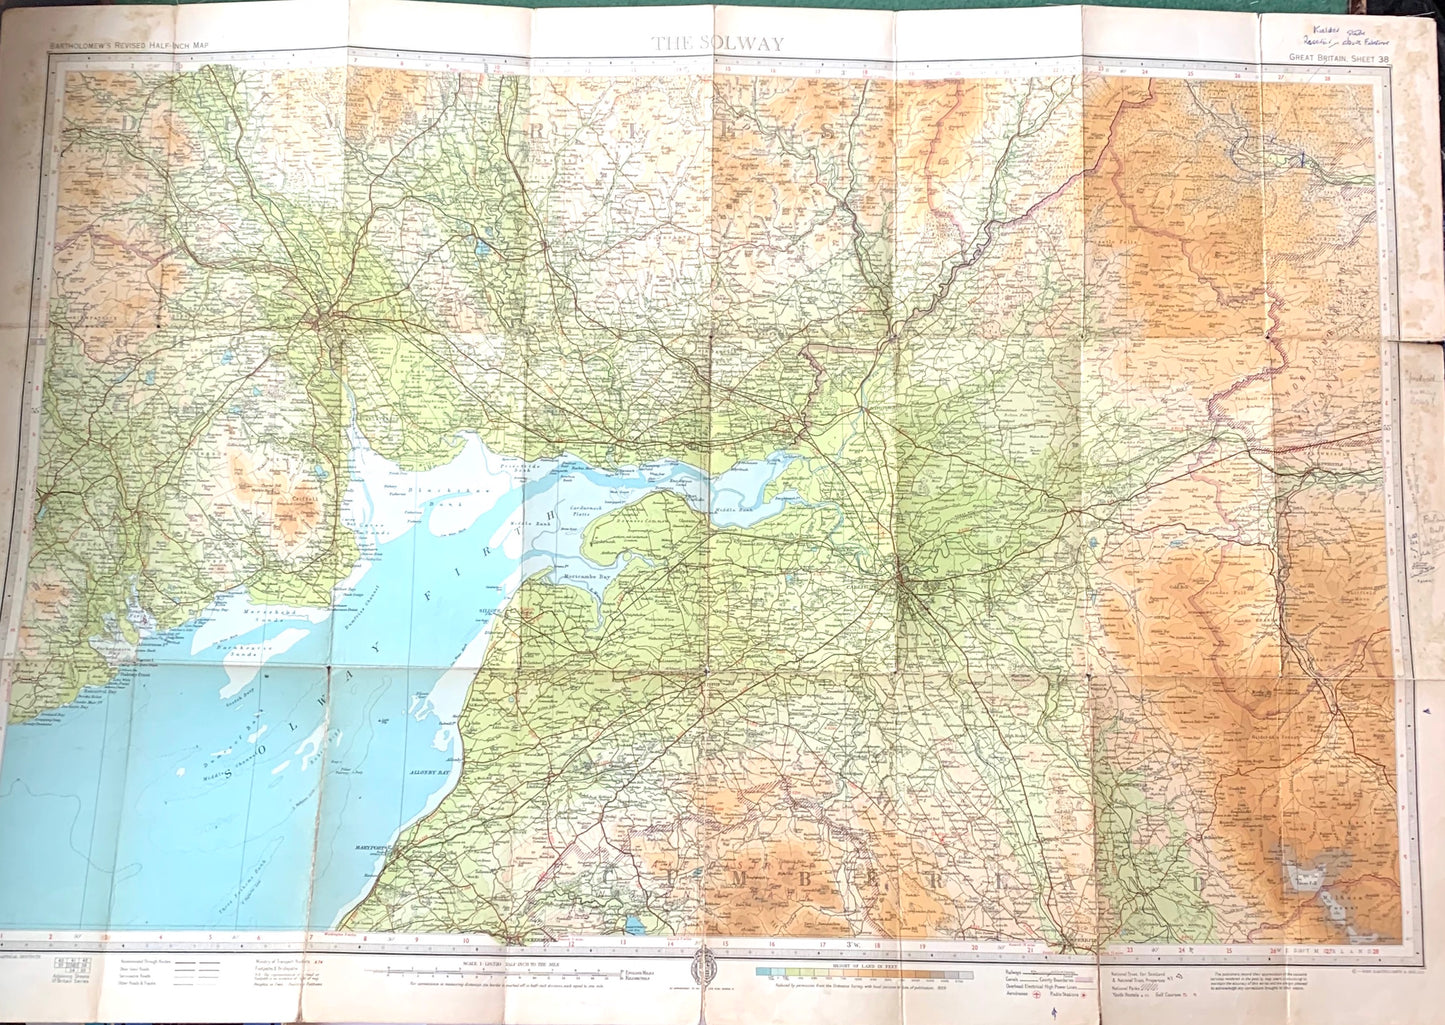 The Solway 1940s & 1950s Cloth mounted Maps Sheet 38. Incl. Carlisle, Penrith, Dumfries.